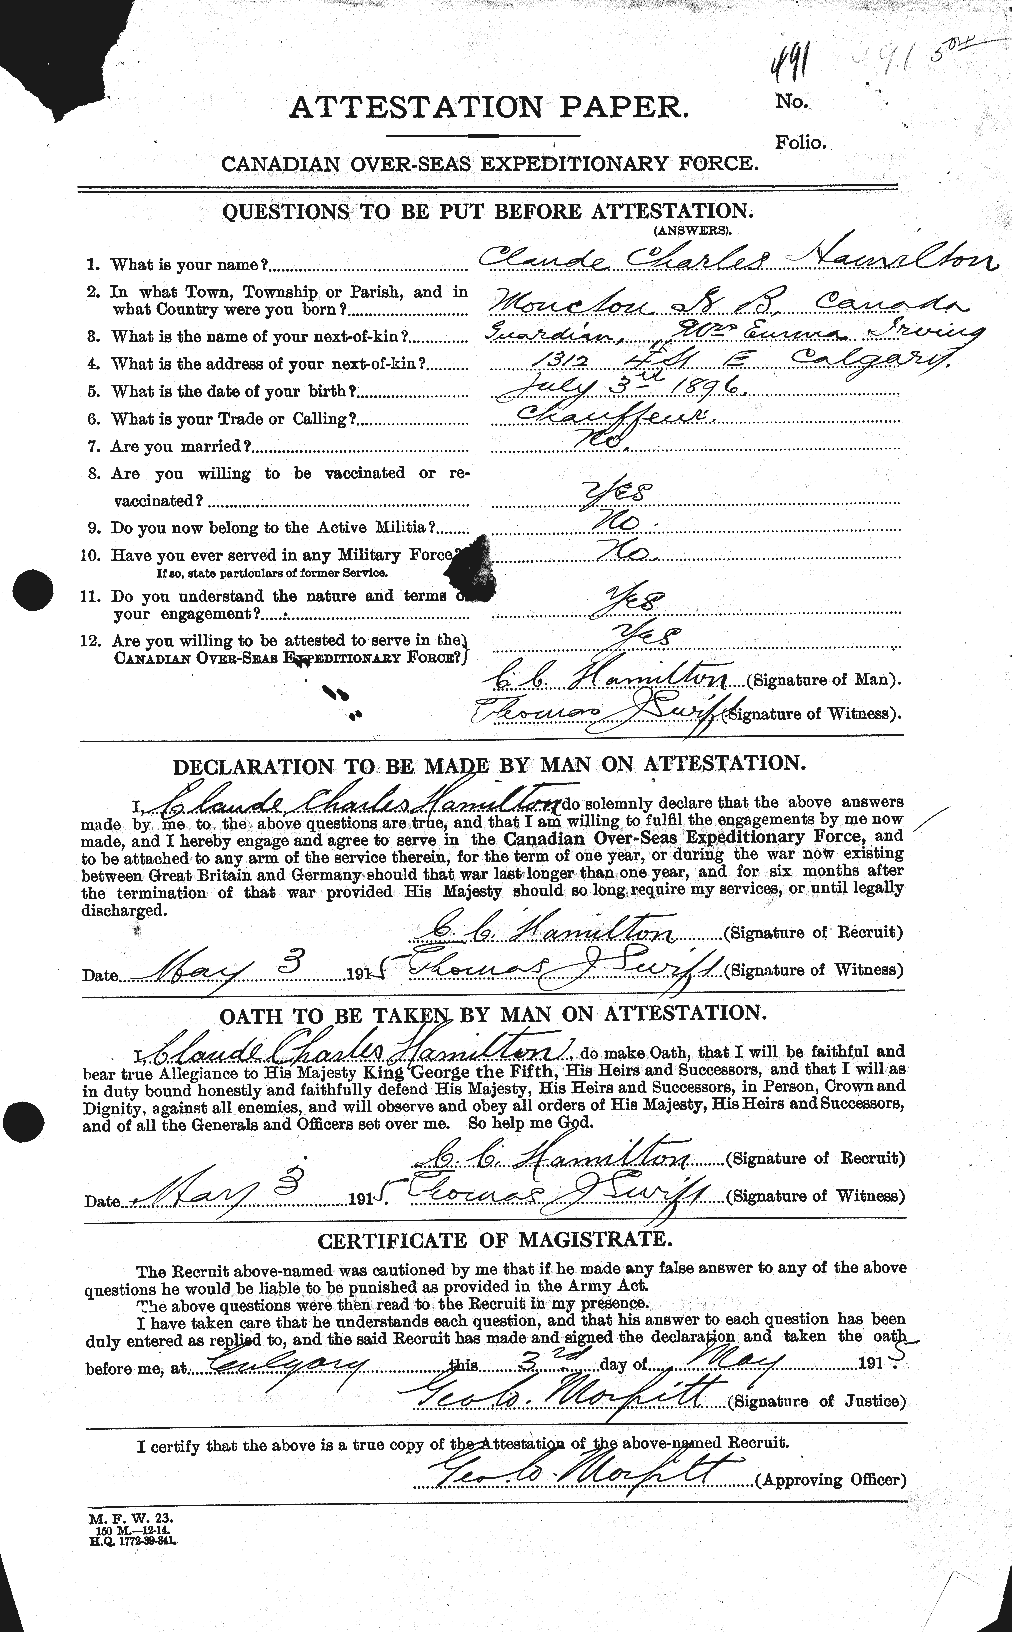 Personnel Records of the First World War - CEF 375325a